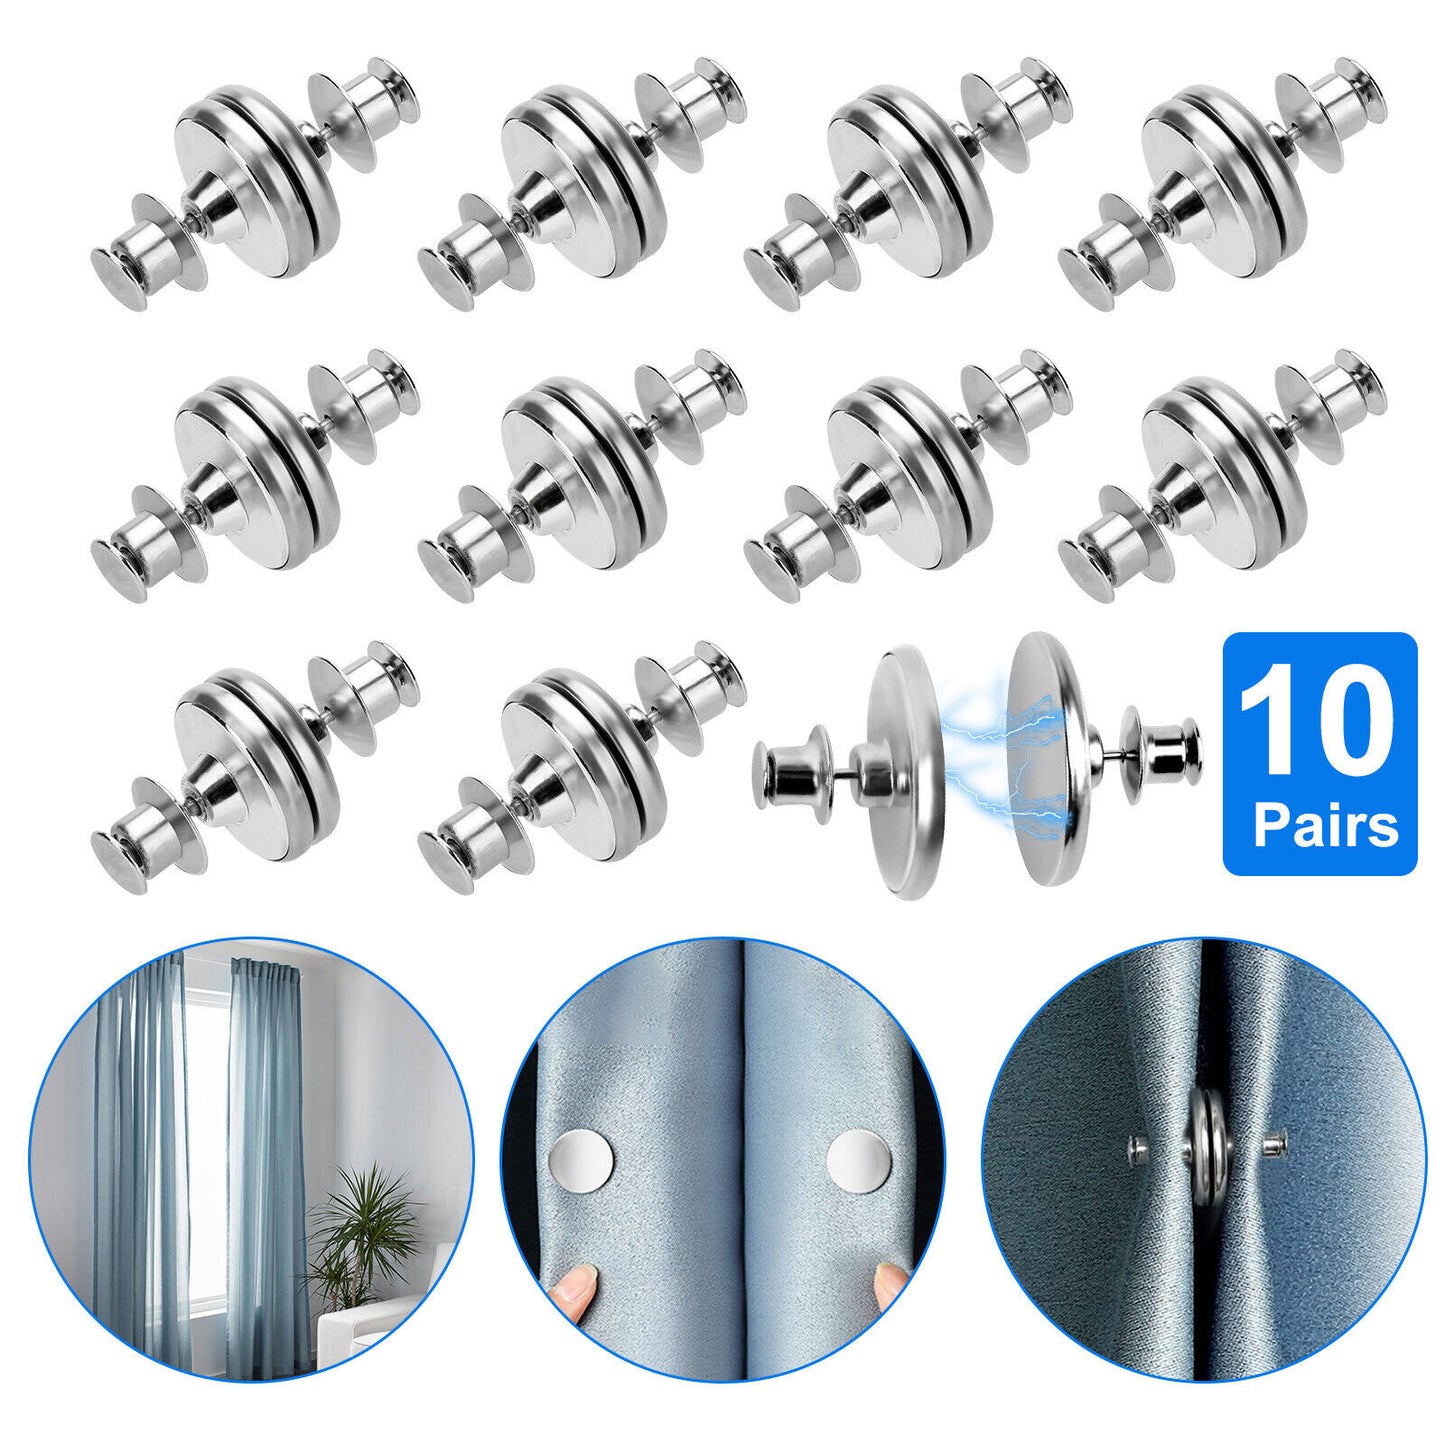 10 Pairs Magnetic Buckle Curtain Clips Nail Button Anti-Light Leakage Decor